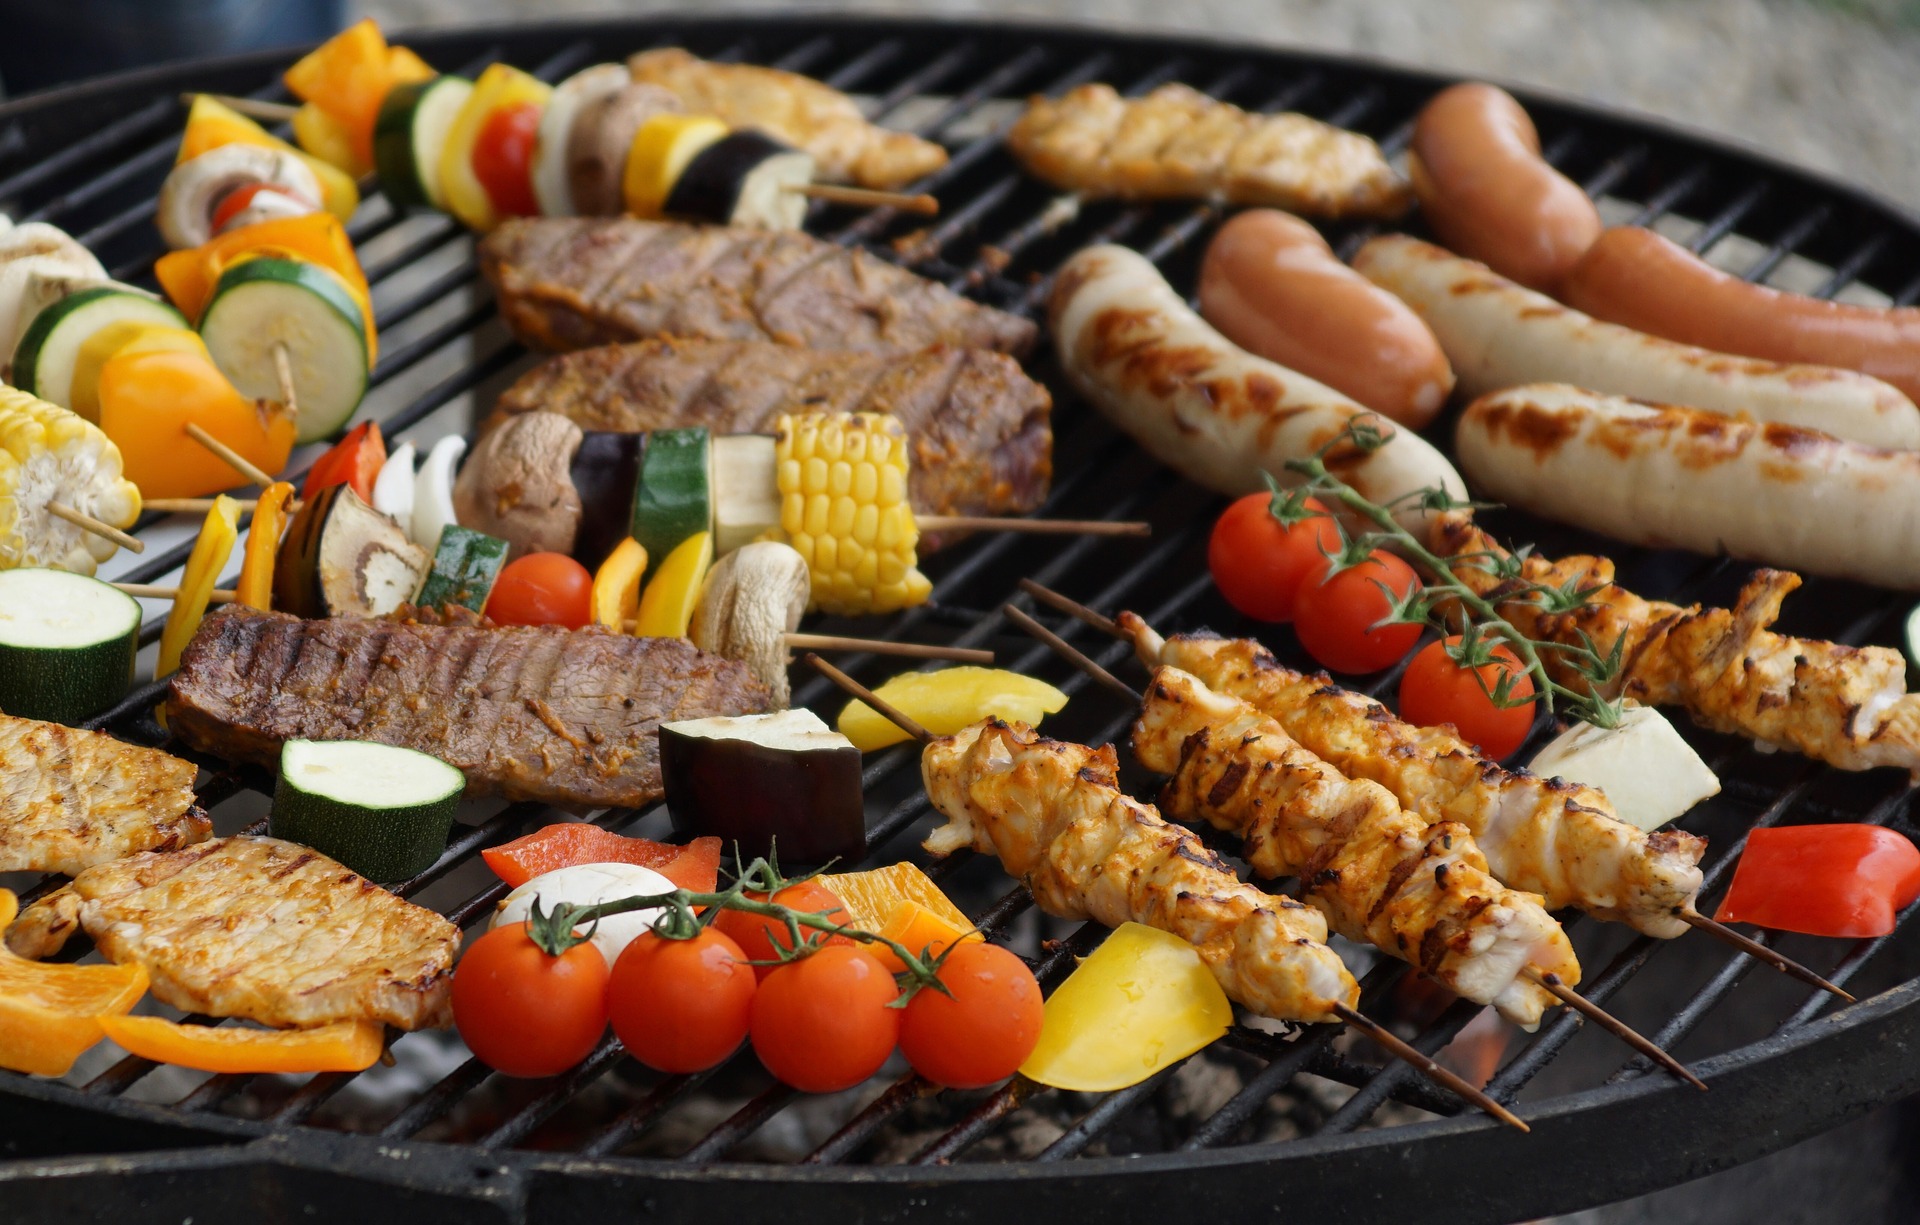 Adding some fruit and vegetables to your grill is a good idea on many levels. (Photo courtesy of Pixabay)